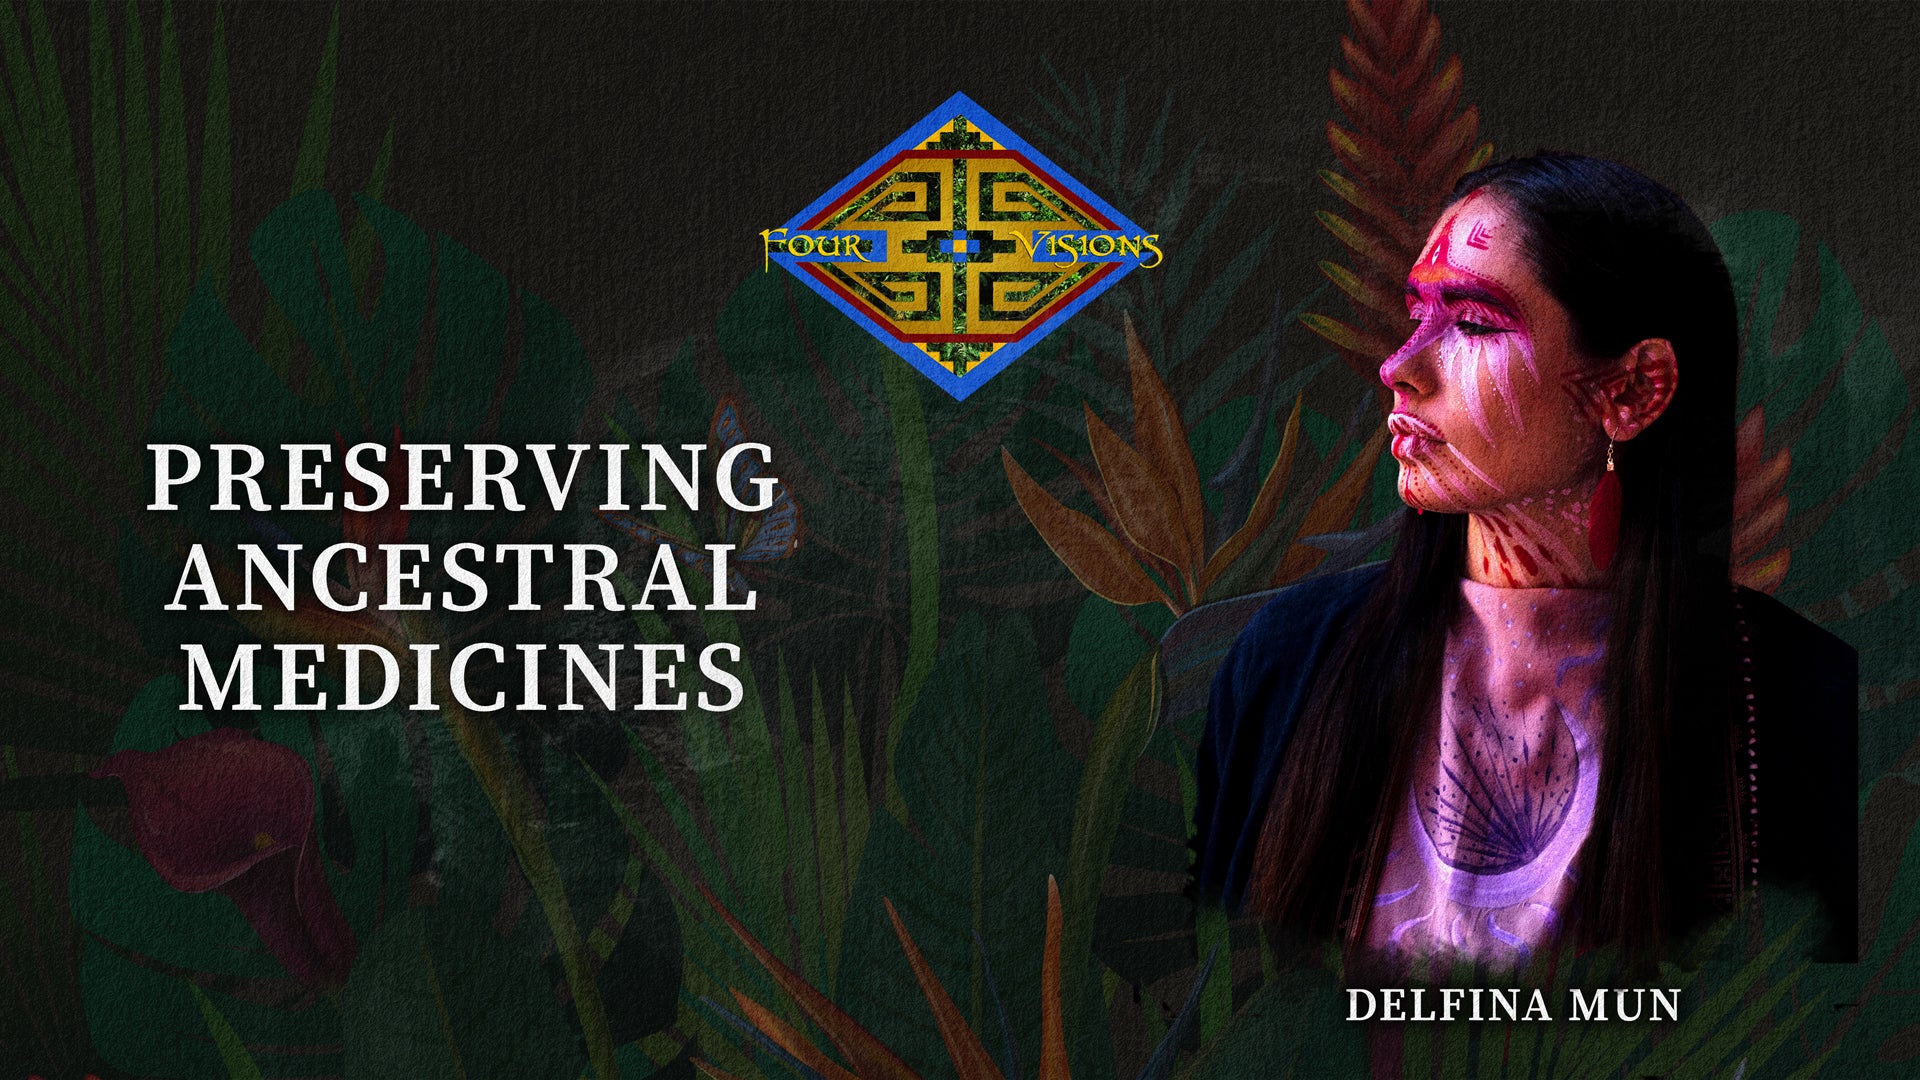 27 - Preserving Ancestral Medicines: The Xinachtli Project and the Creative Expression of Visionary Delfina Mun